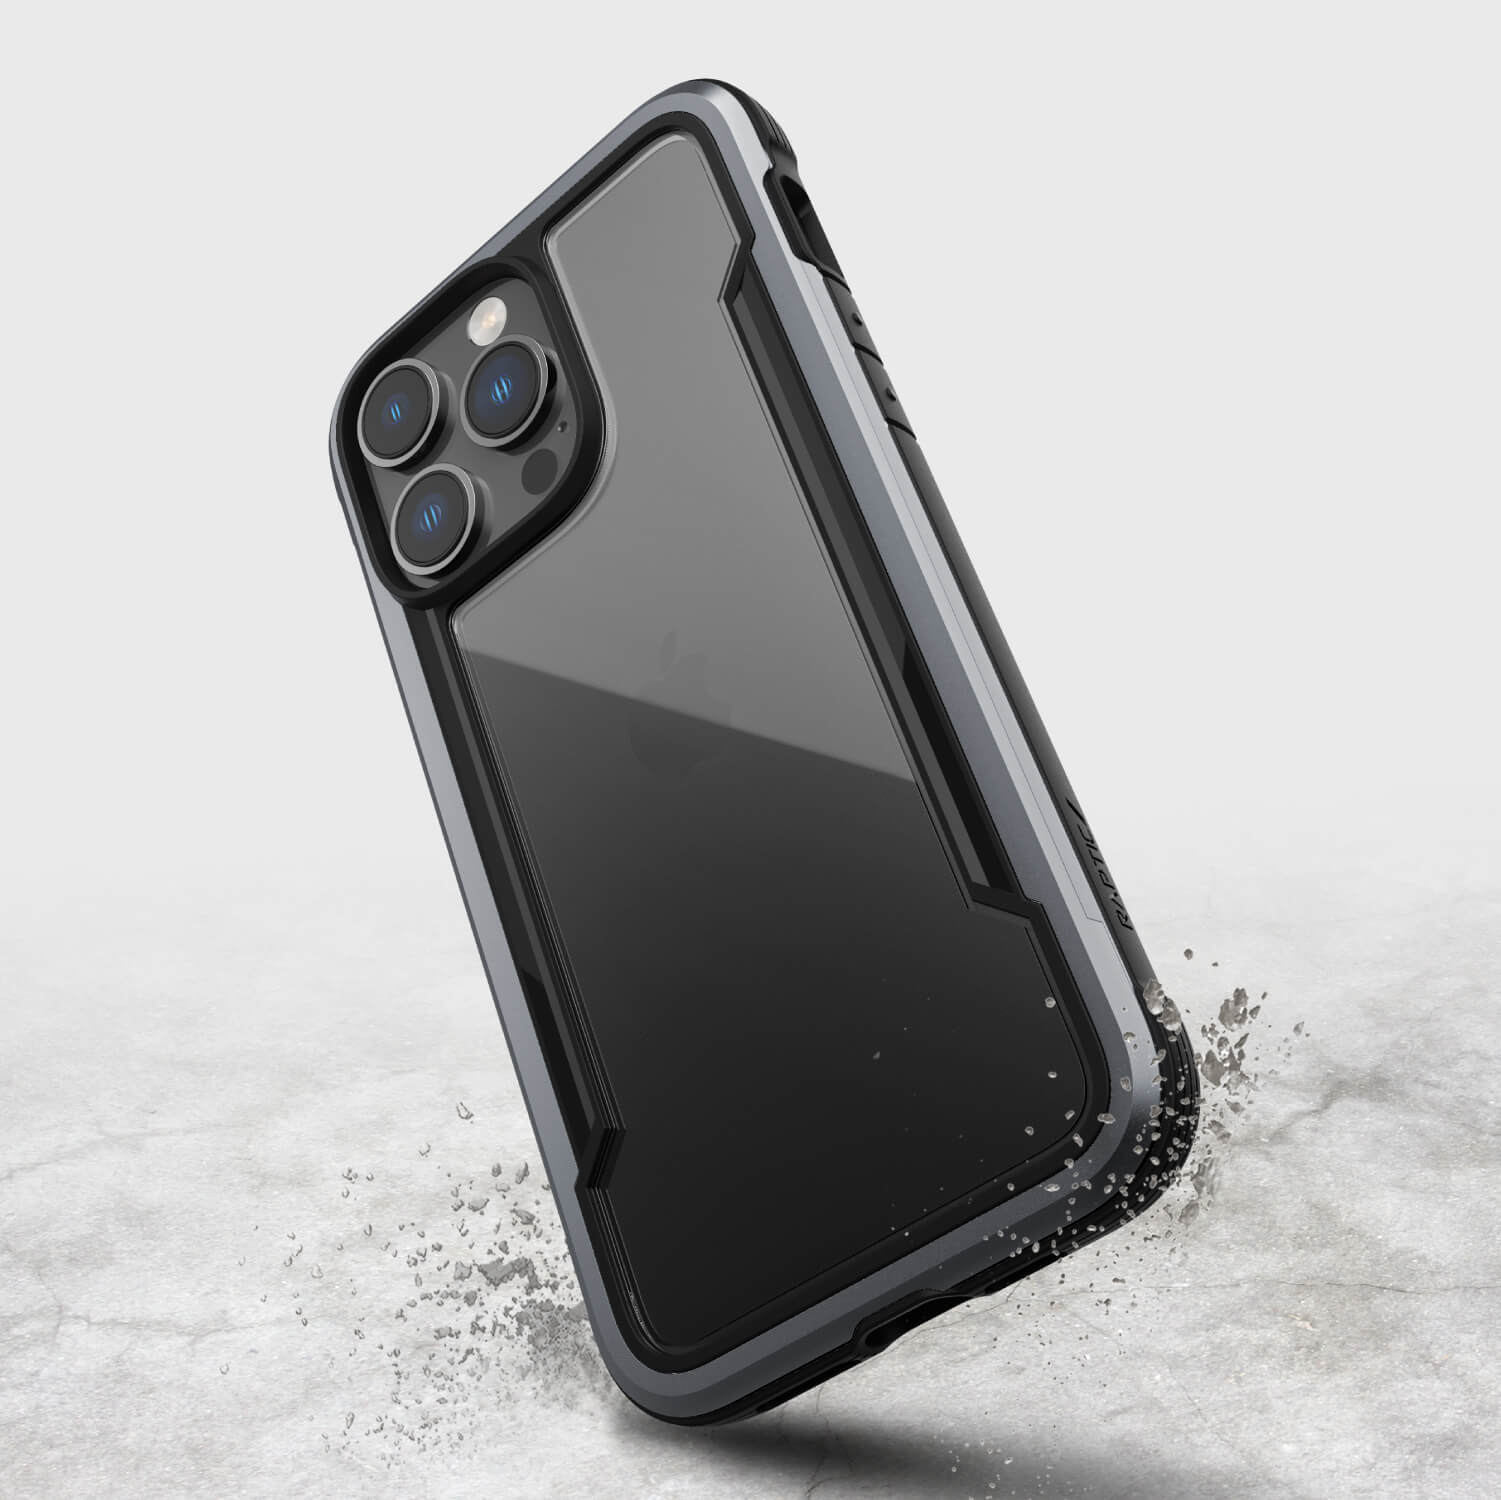 Raptic Shield for iPhone 14 Pro Max Case, Shockproof Protective Clear Black